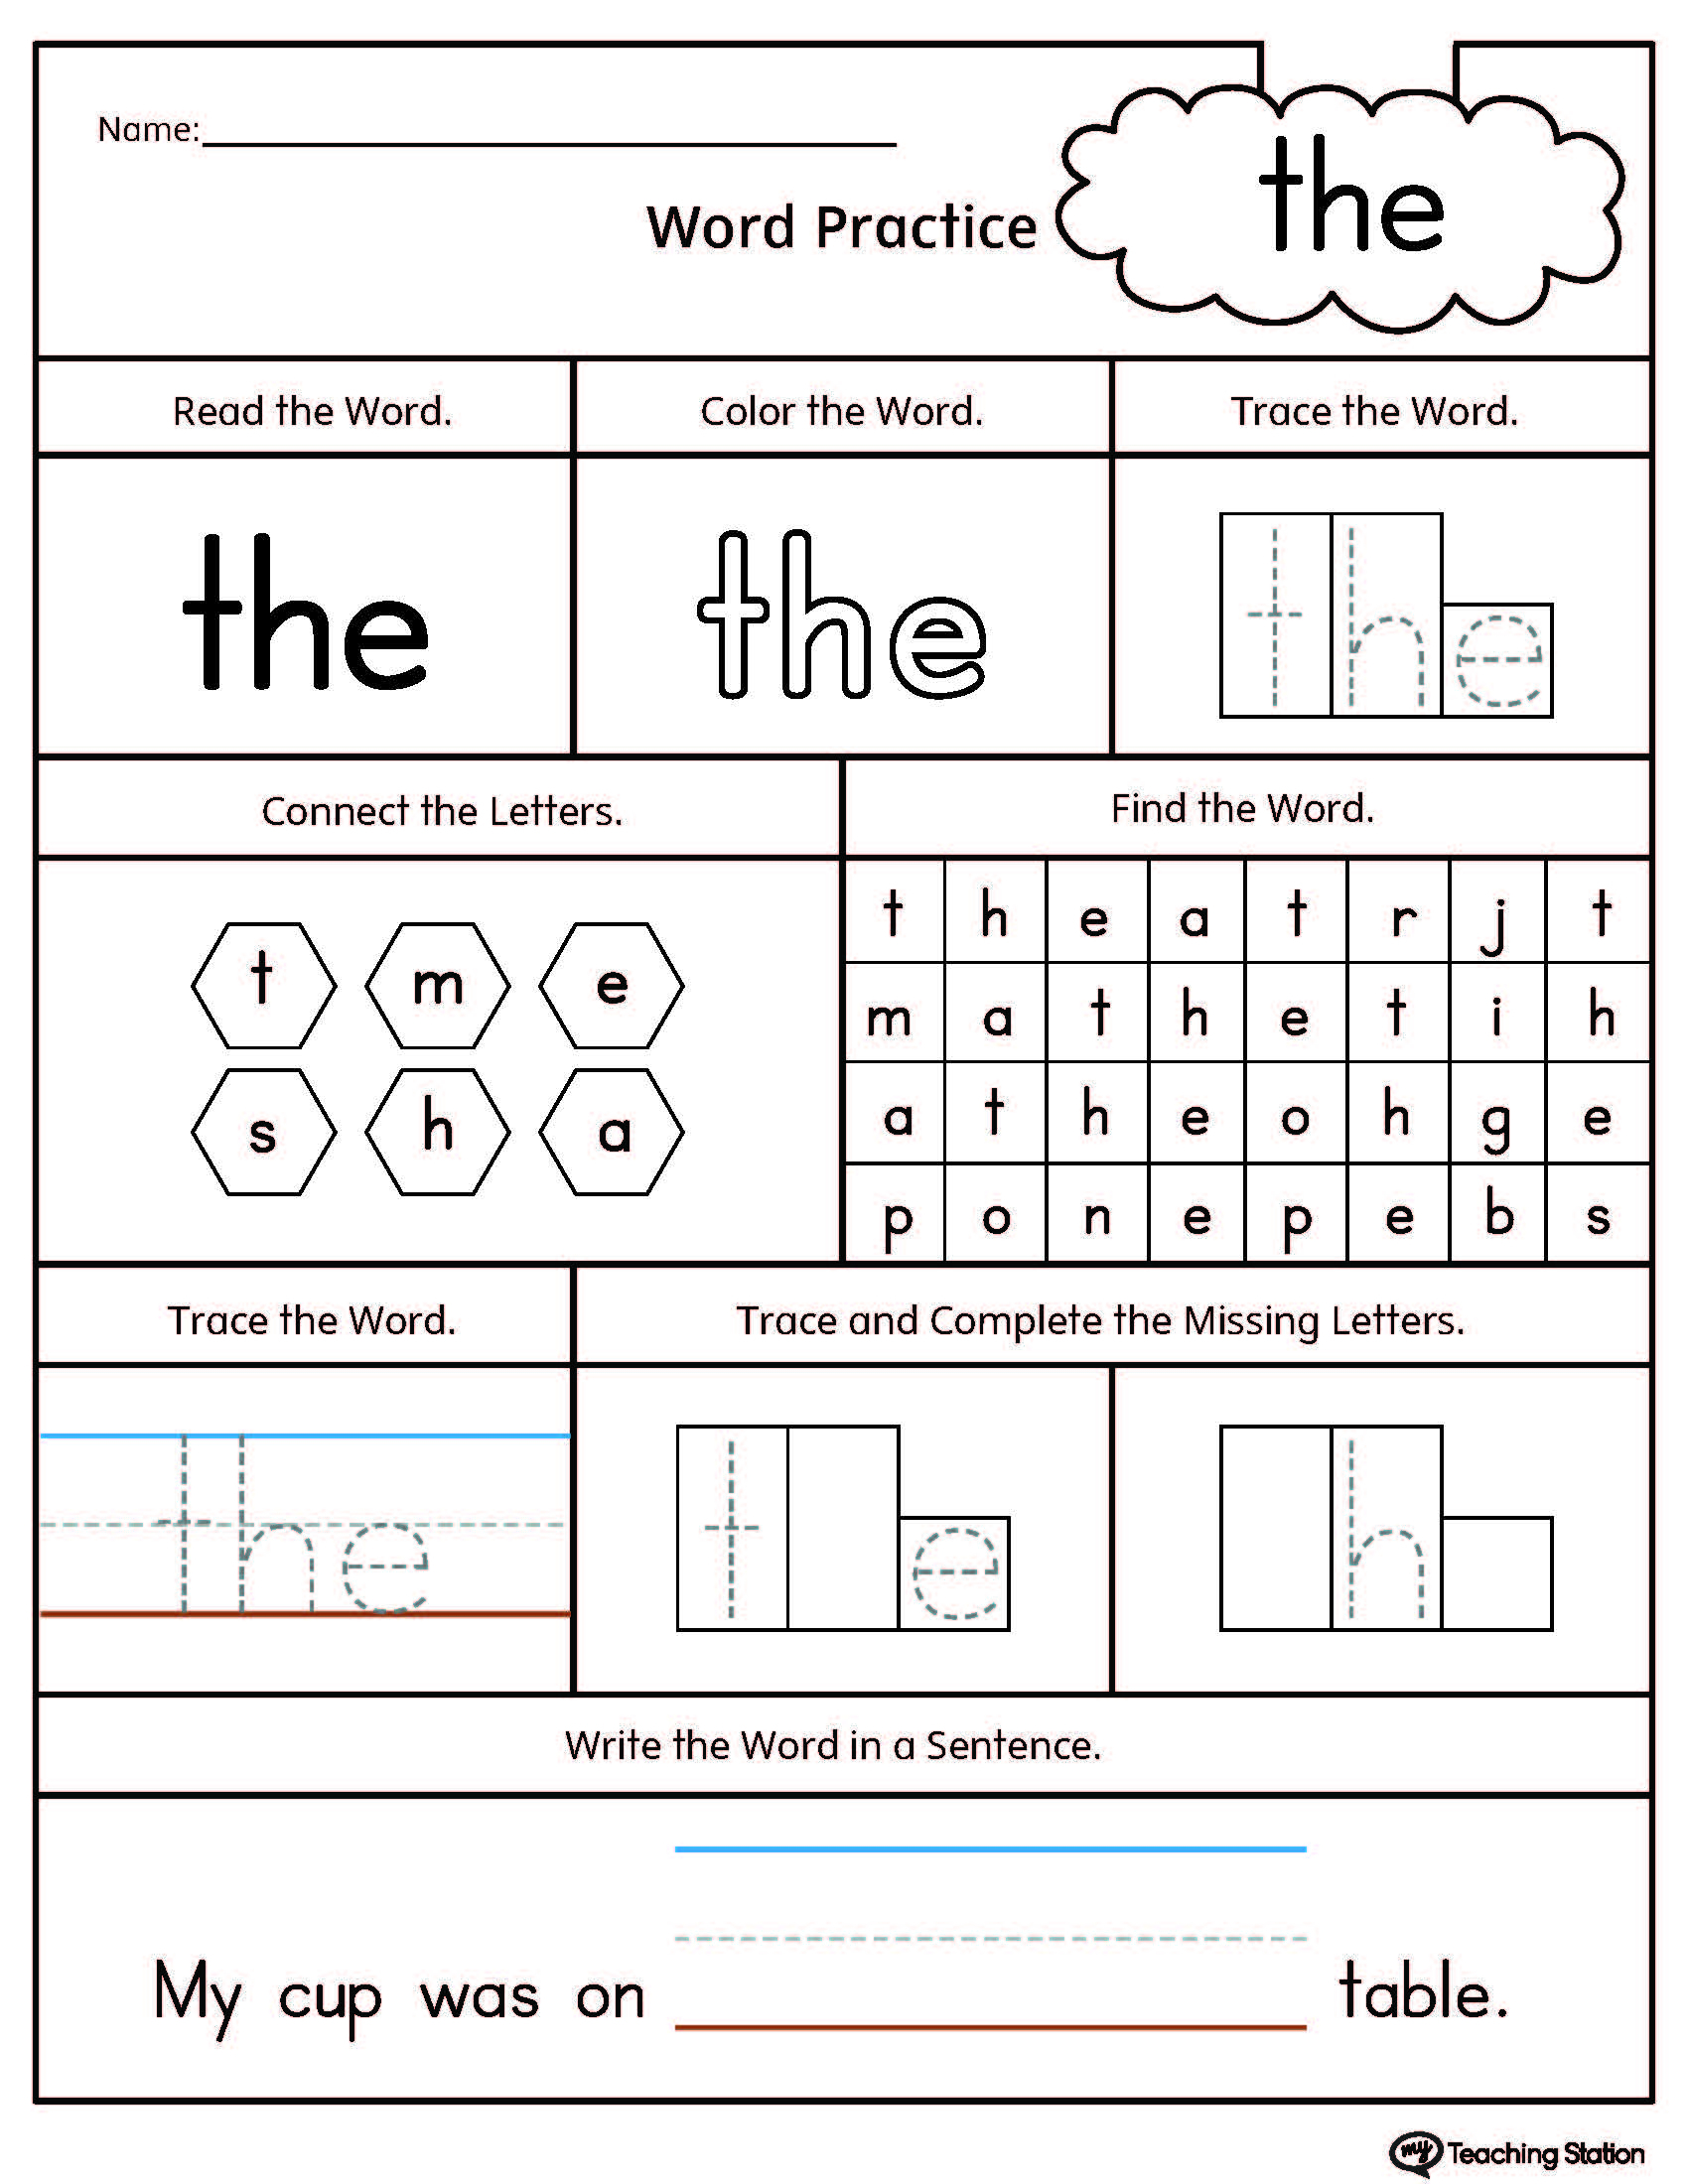 Coloring Pages Coloring Pages Sight Words Worksheets Pdf Download Dolch Words Worksheets 